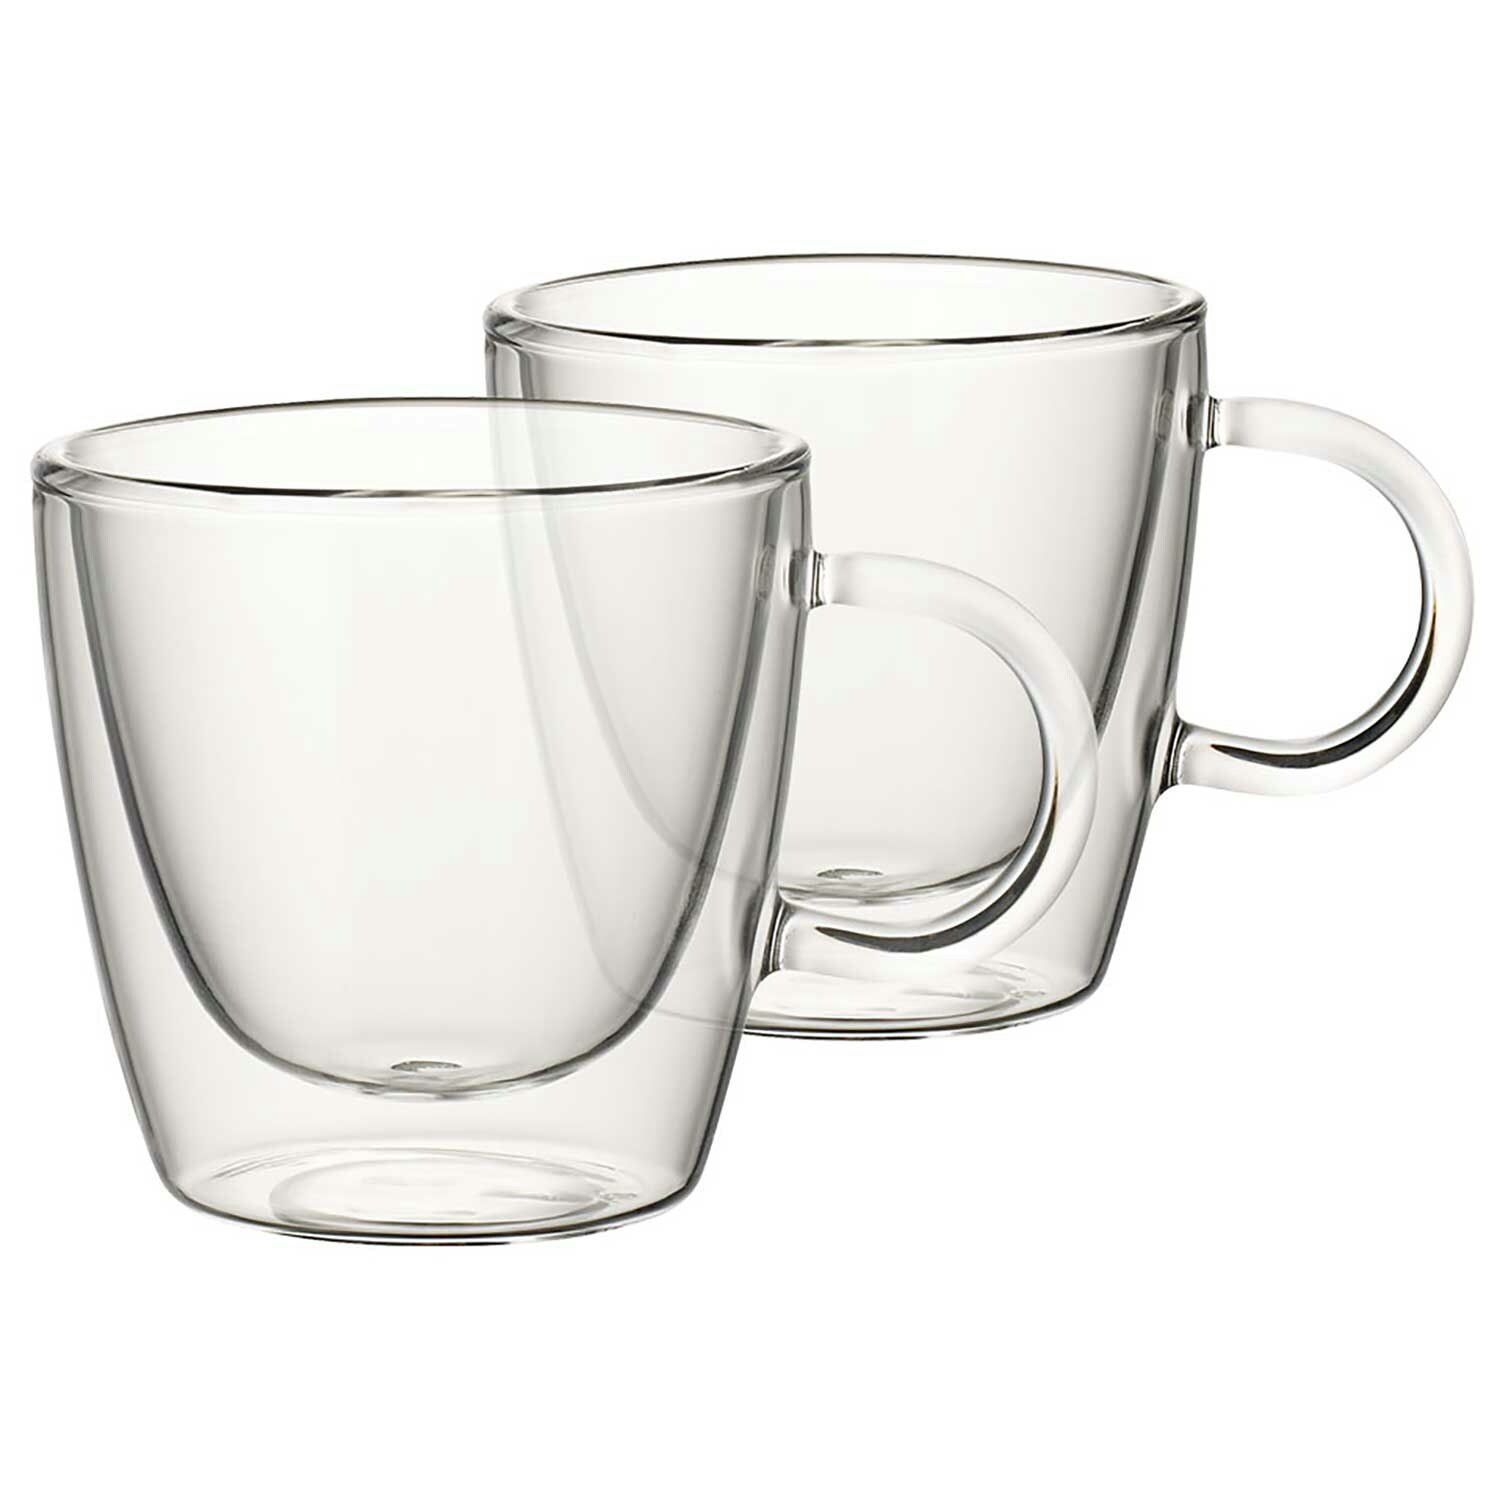 Villeroy & Boch Artesano L Hot and Cold Beverages Cup Set Of Two